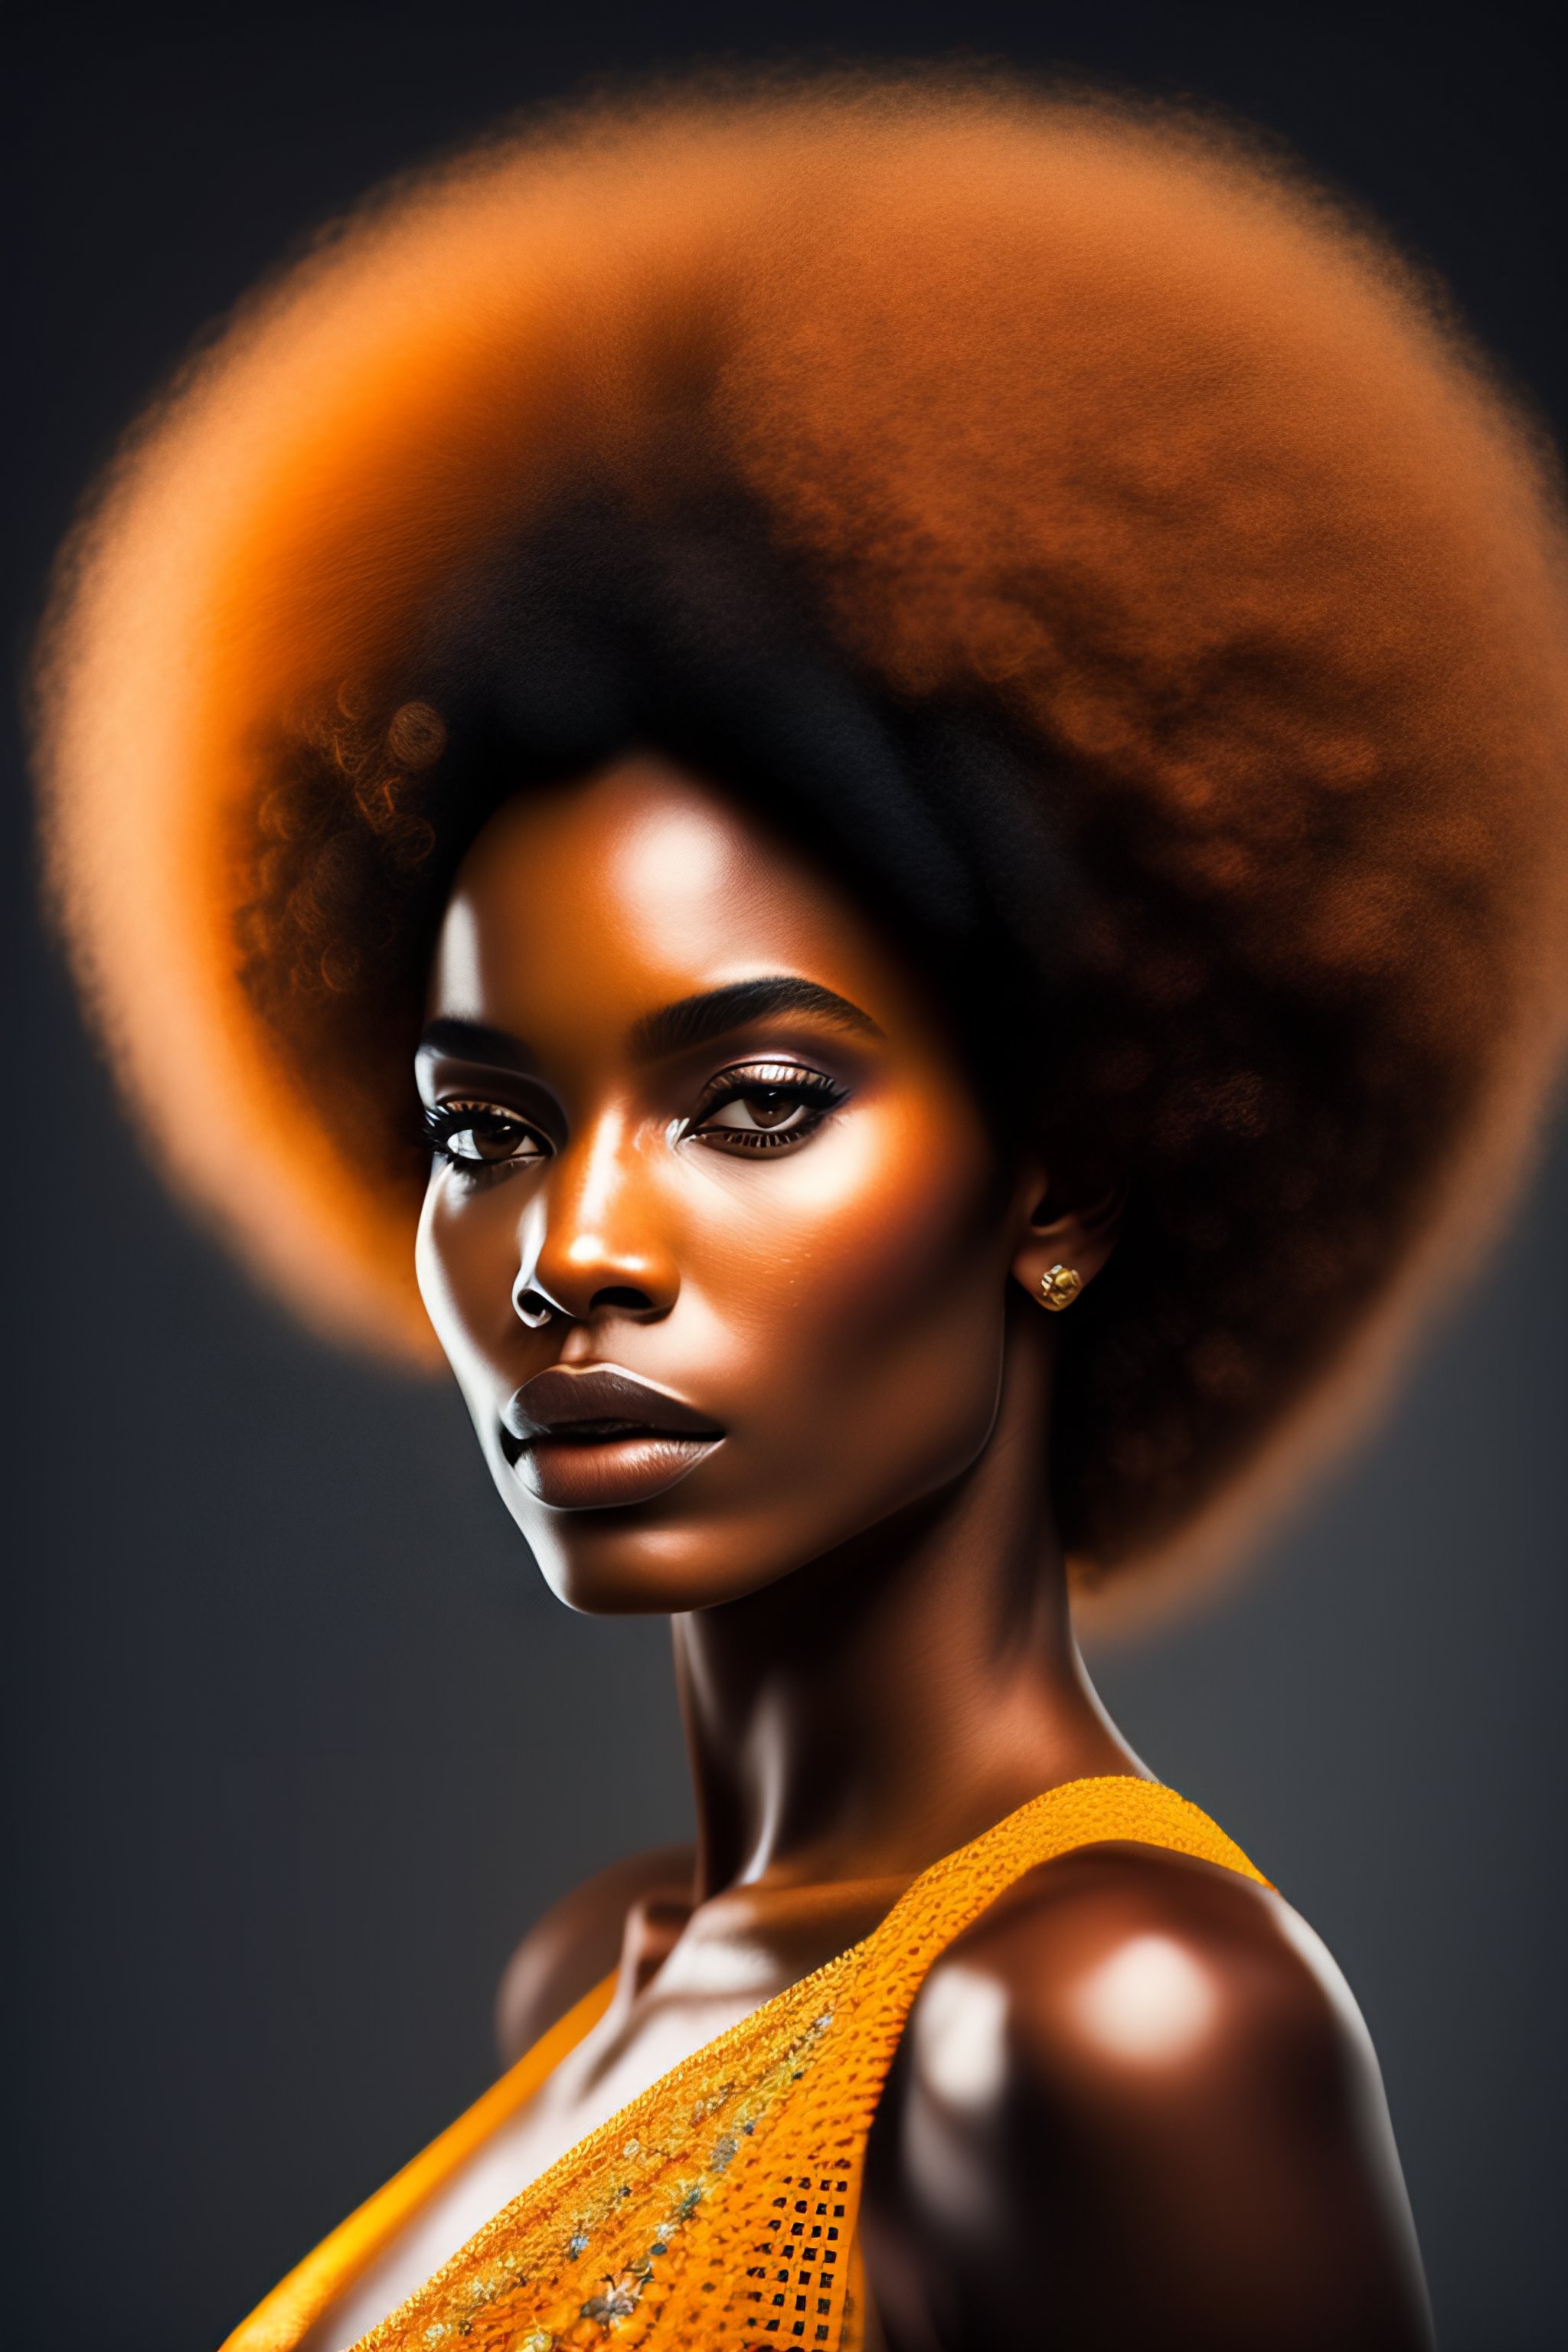 Lexica A Beautiful And Mysterious Melanated Woman With An Afro No Blur Close Up Details 7918